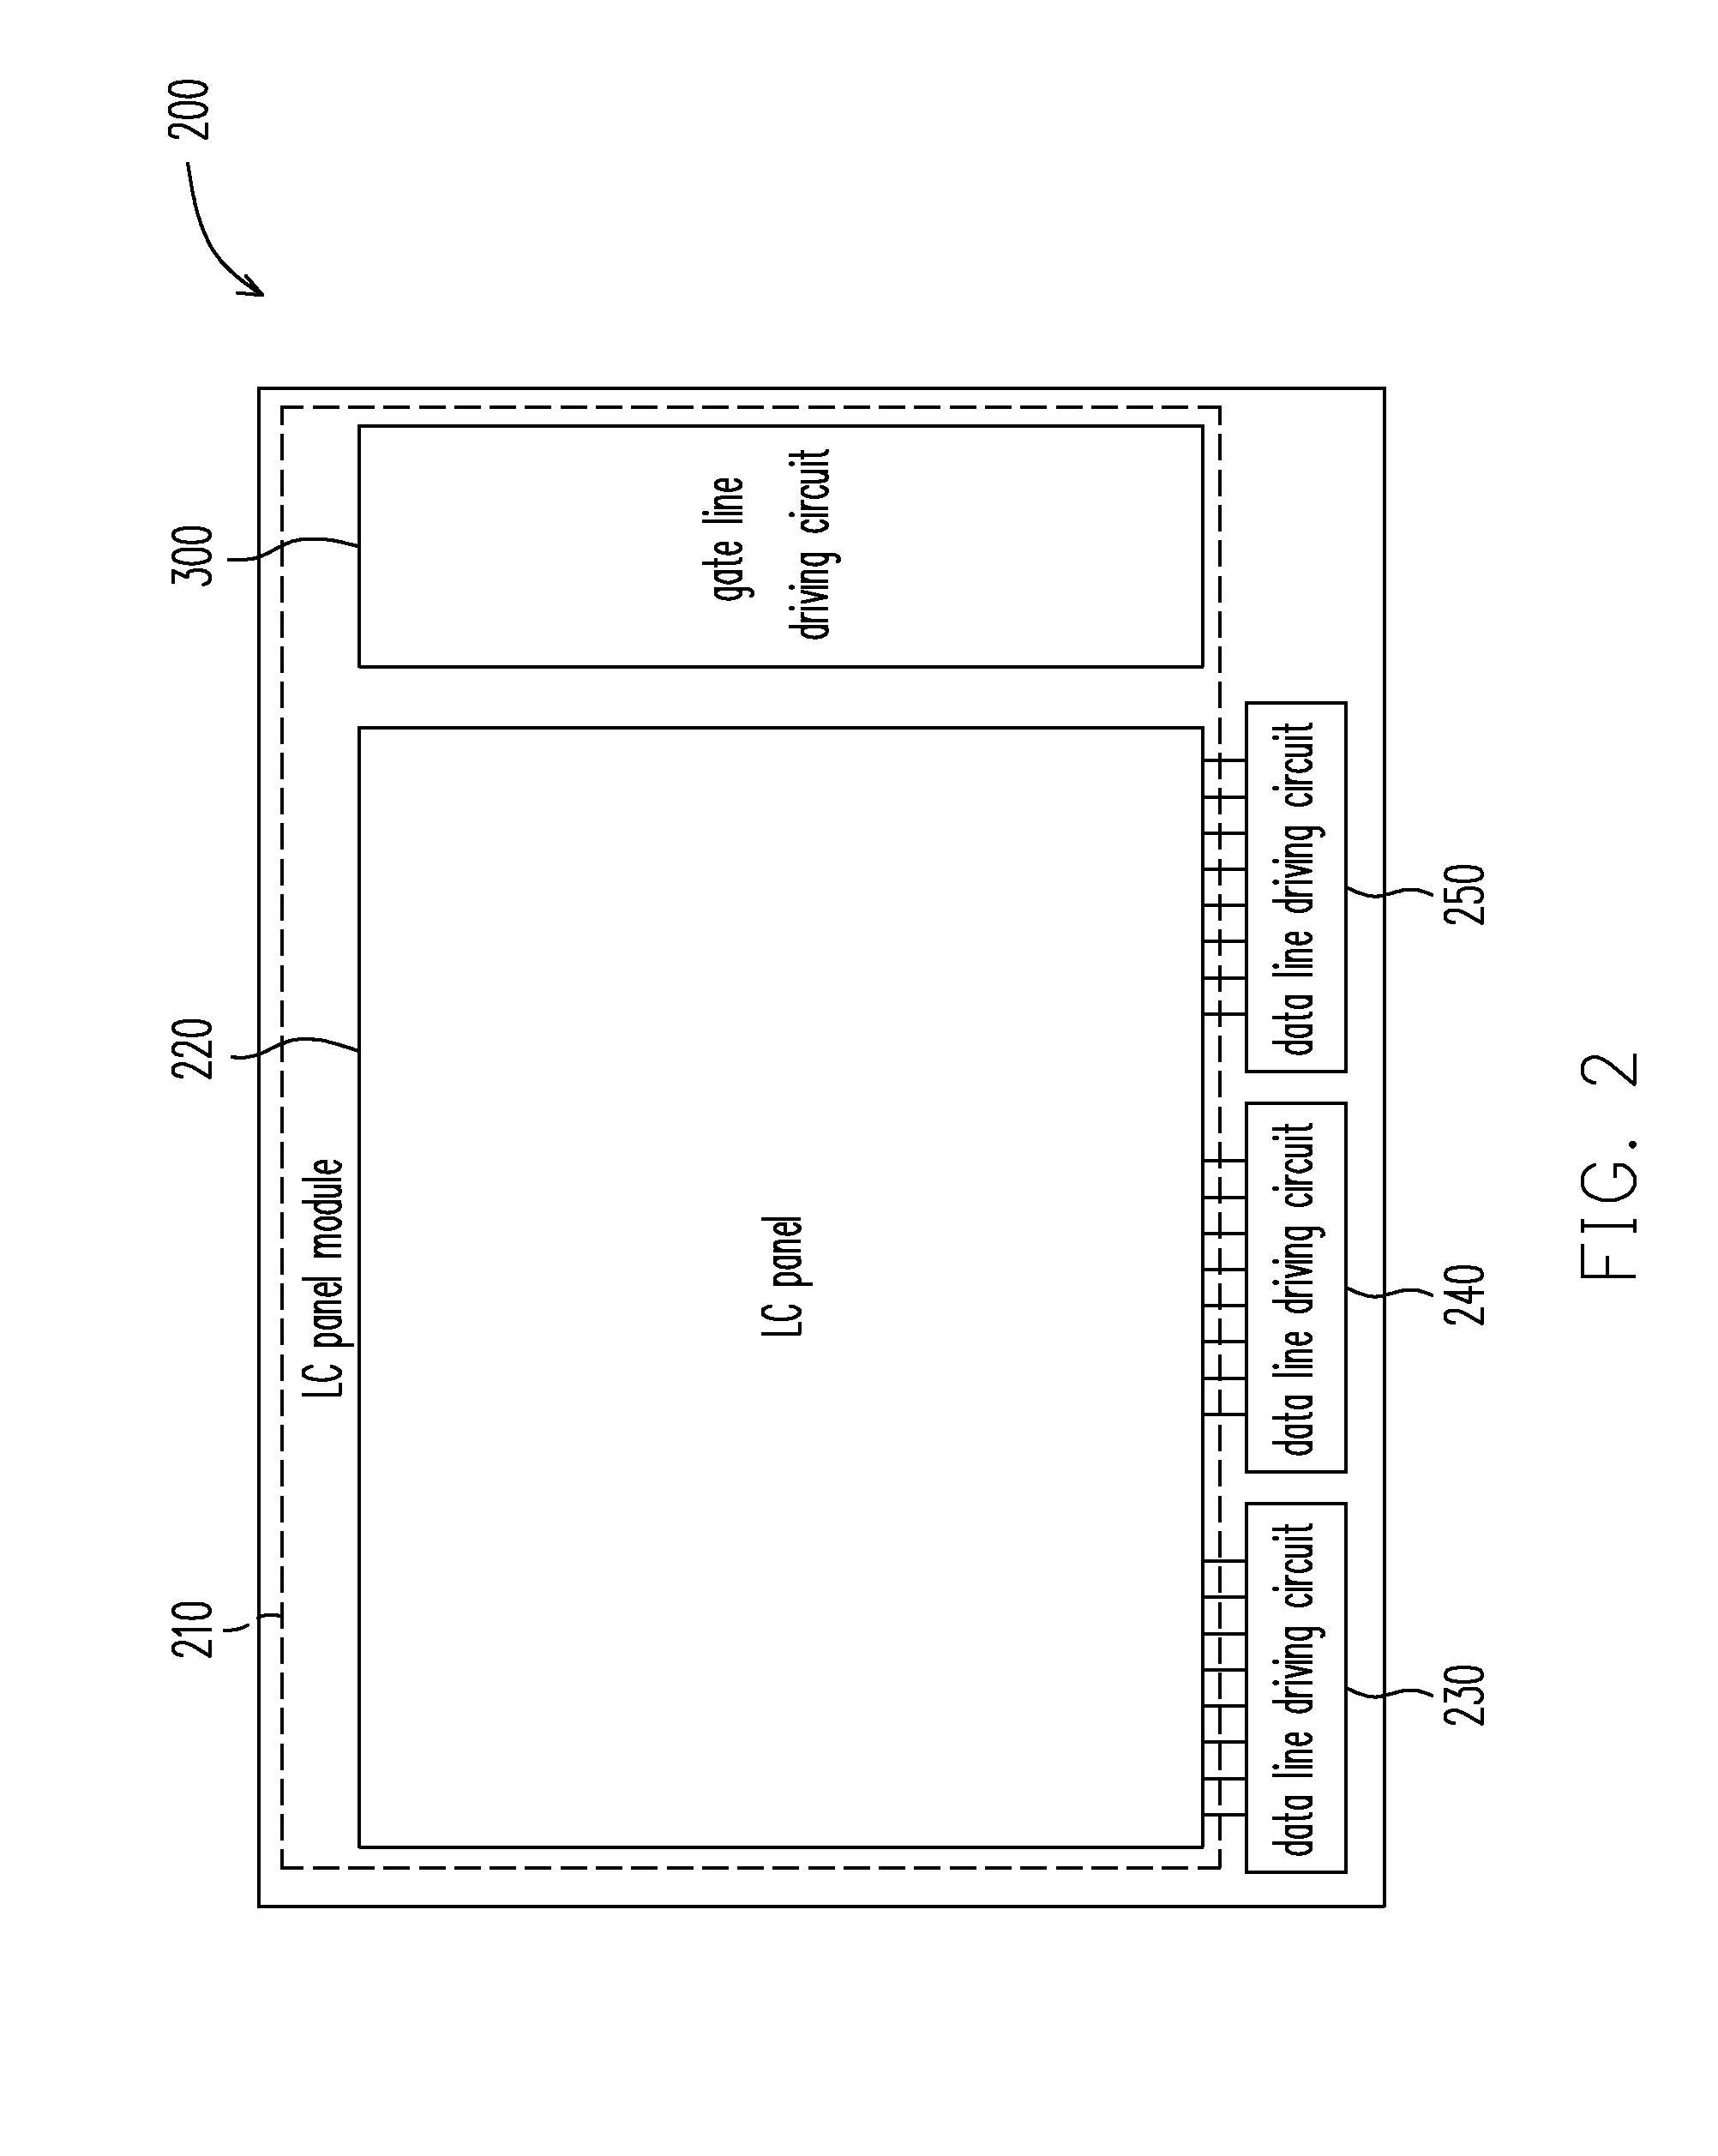 Gate line driving module for liquid crystal display and liquid crystal display using the same